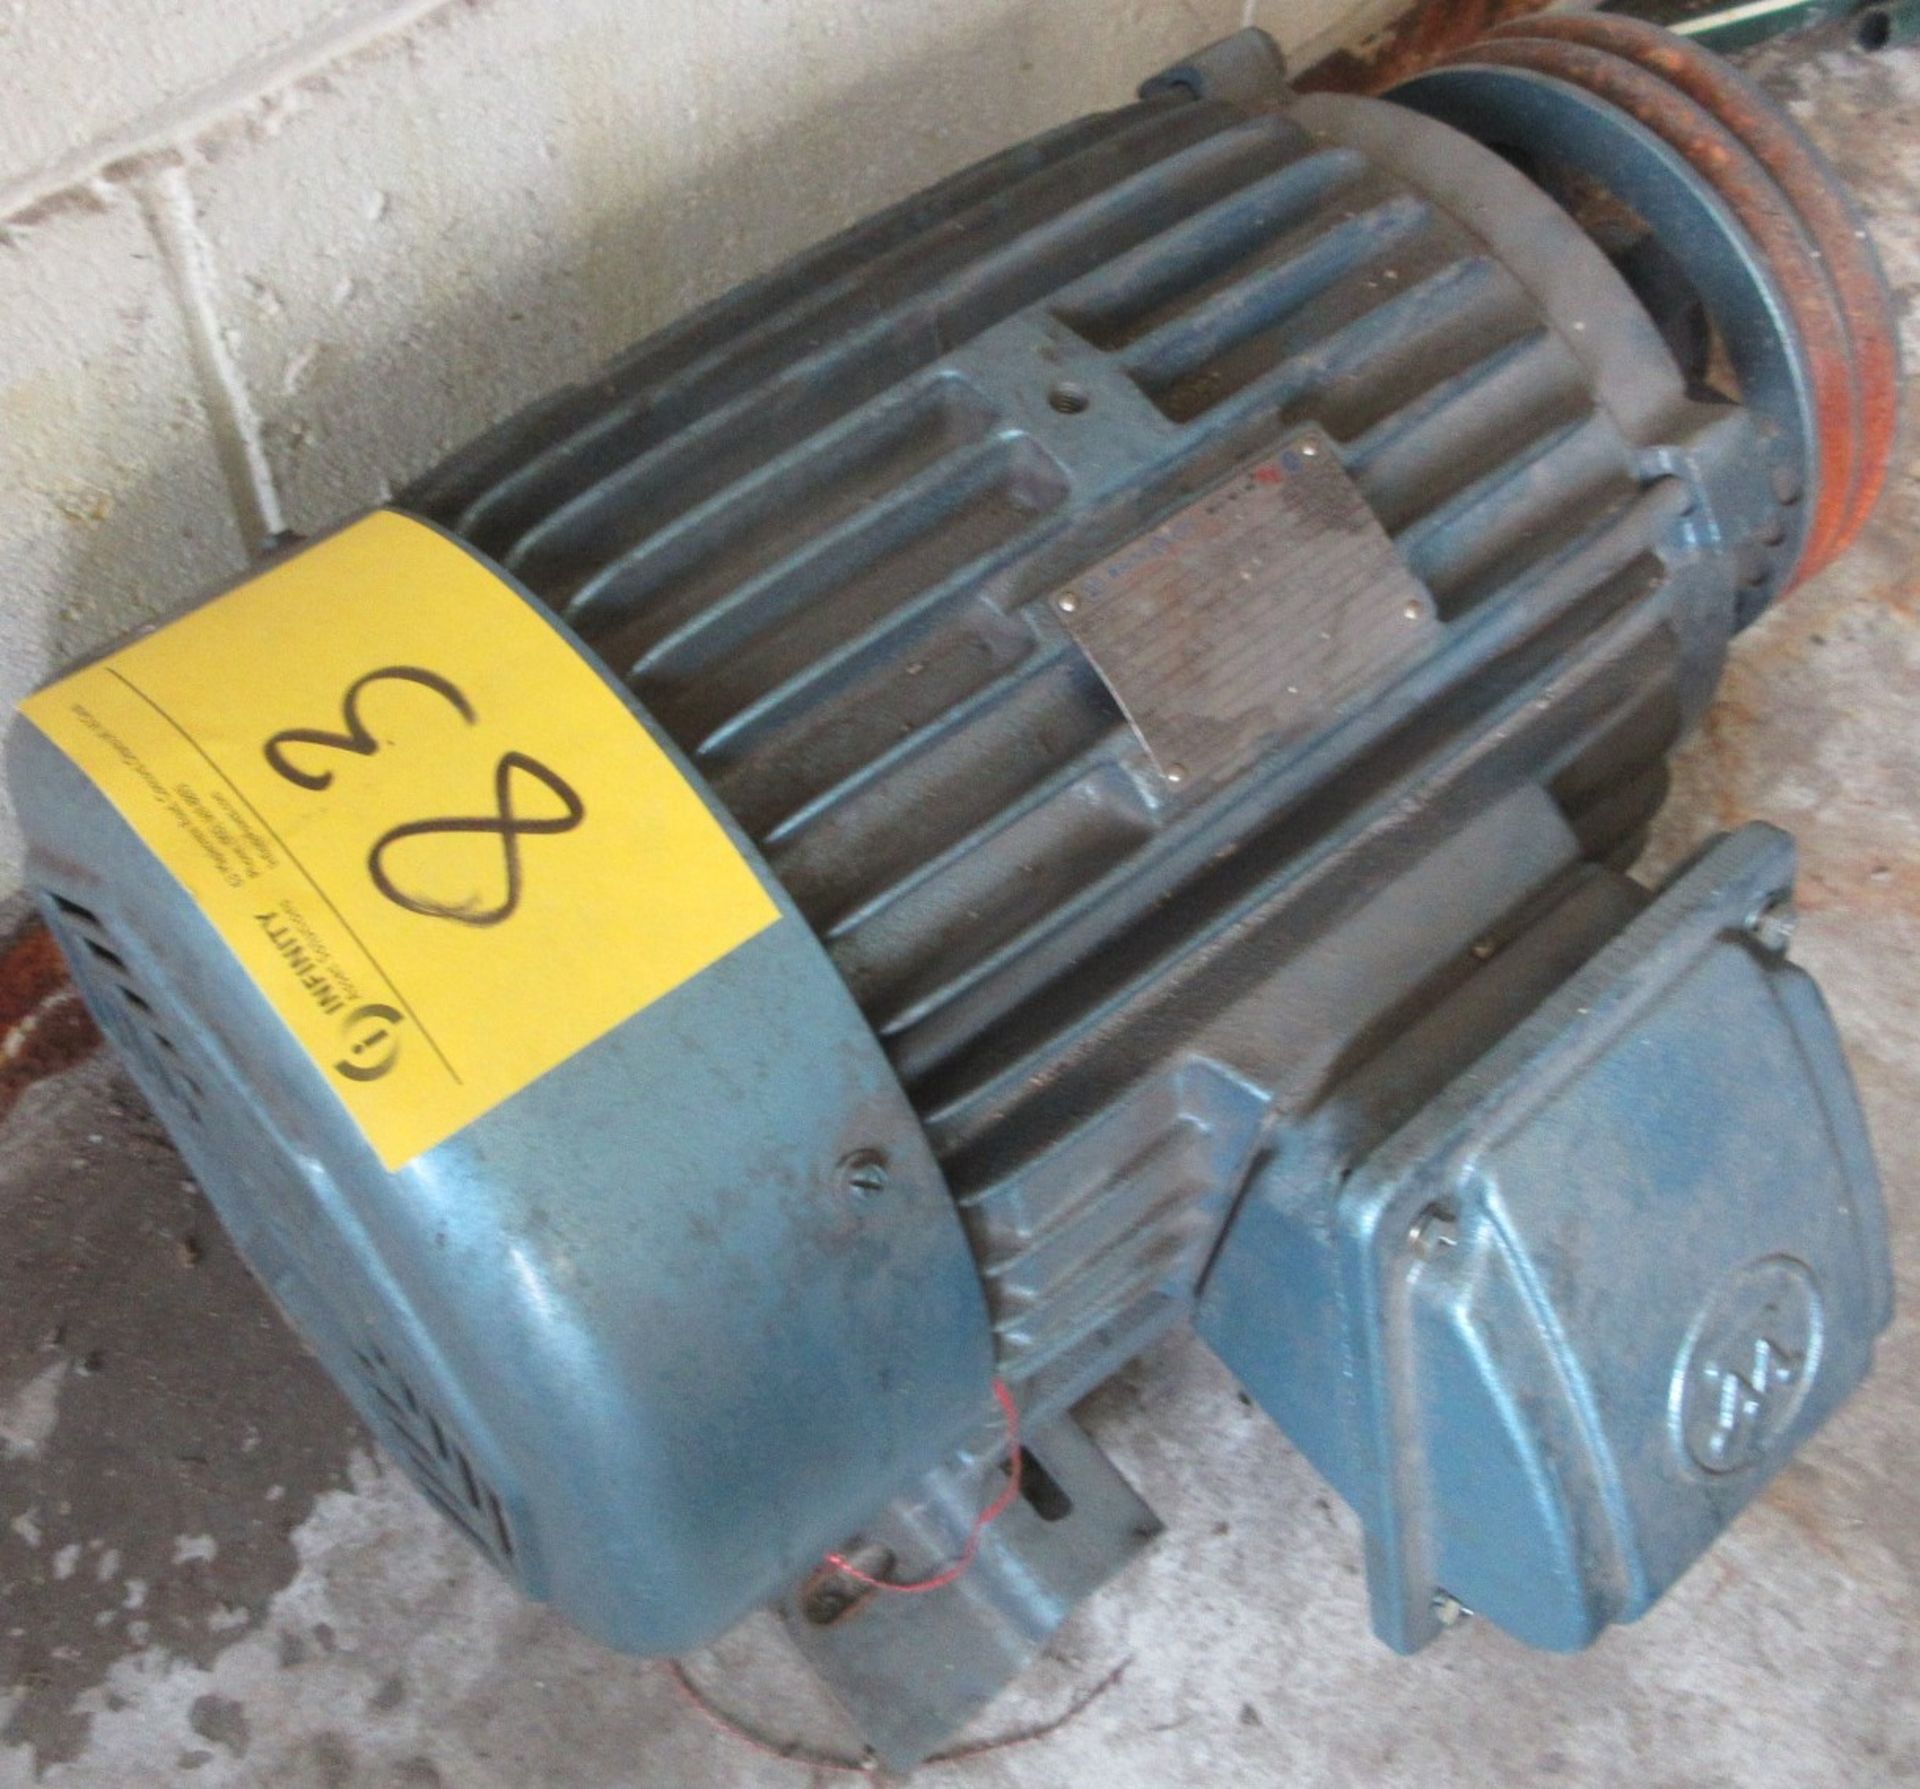 EMOD VUF 160M/2-130 MOTOR / BLOWER AND WESTINGHOUSE 7.5HP MOTOR (SUBJECT TO BULK BID LOT 74A) - Image 5 of 8